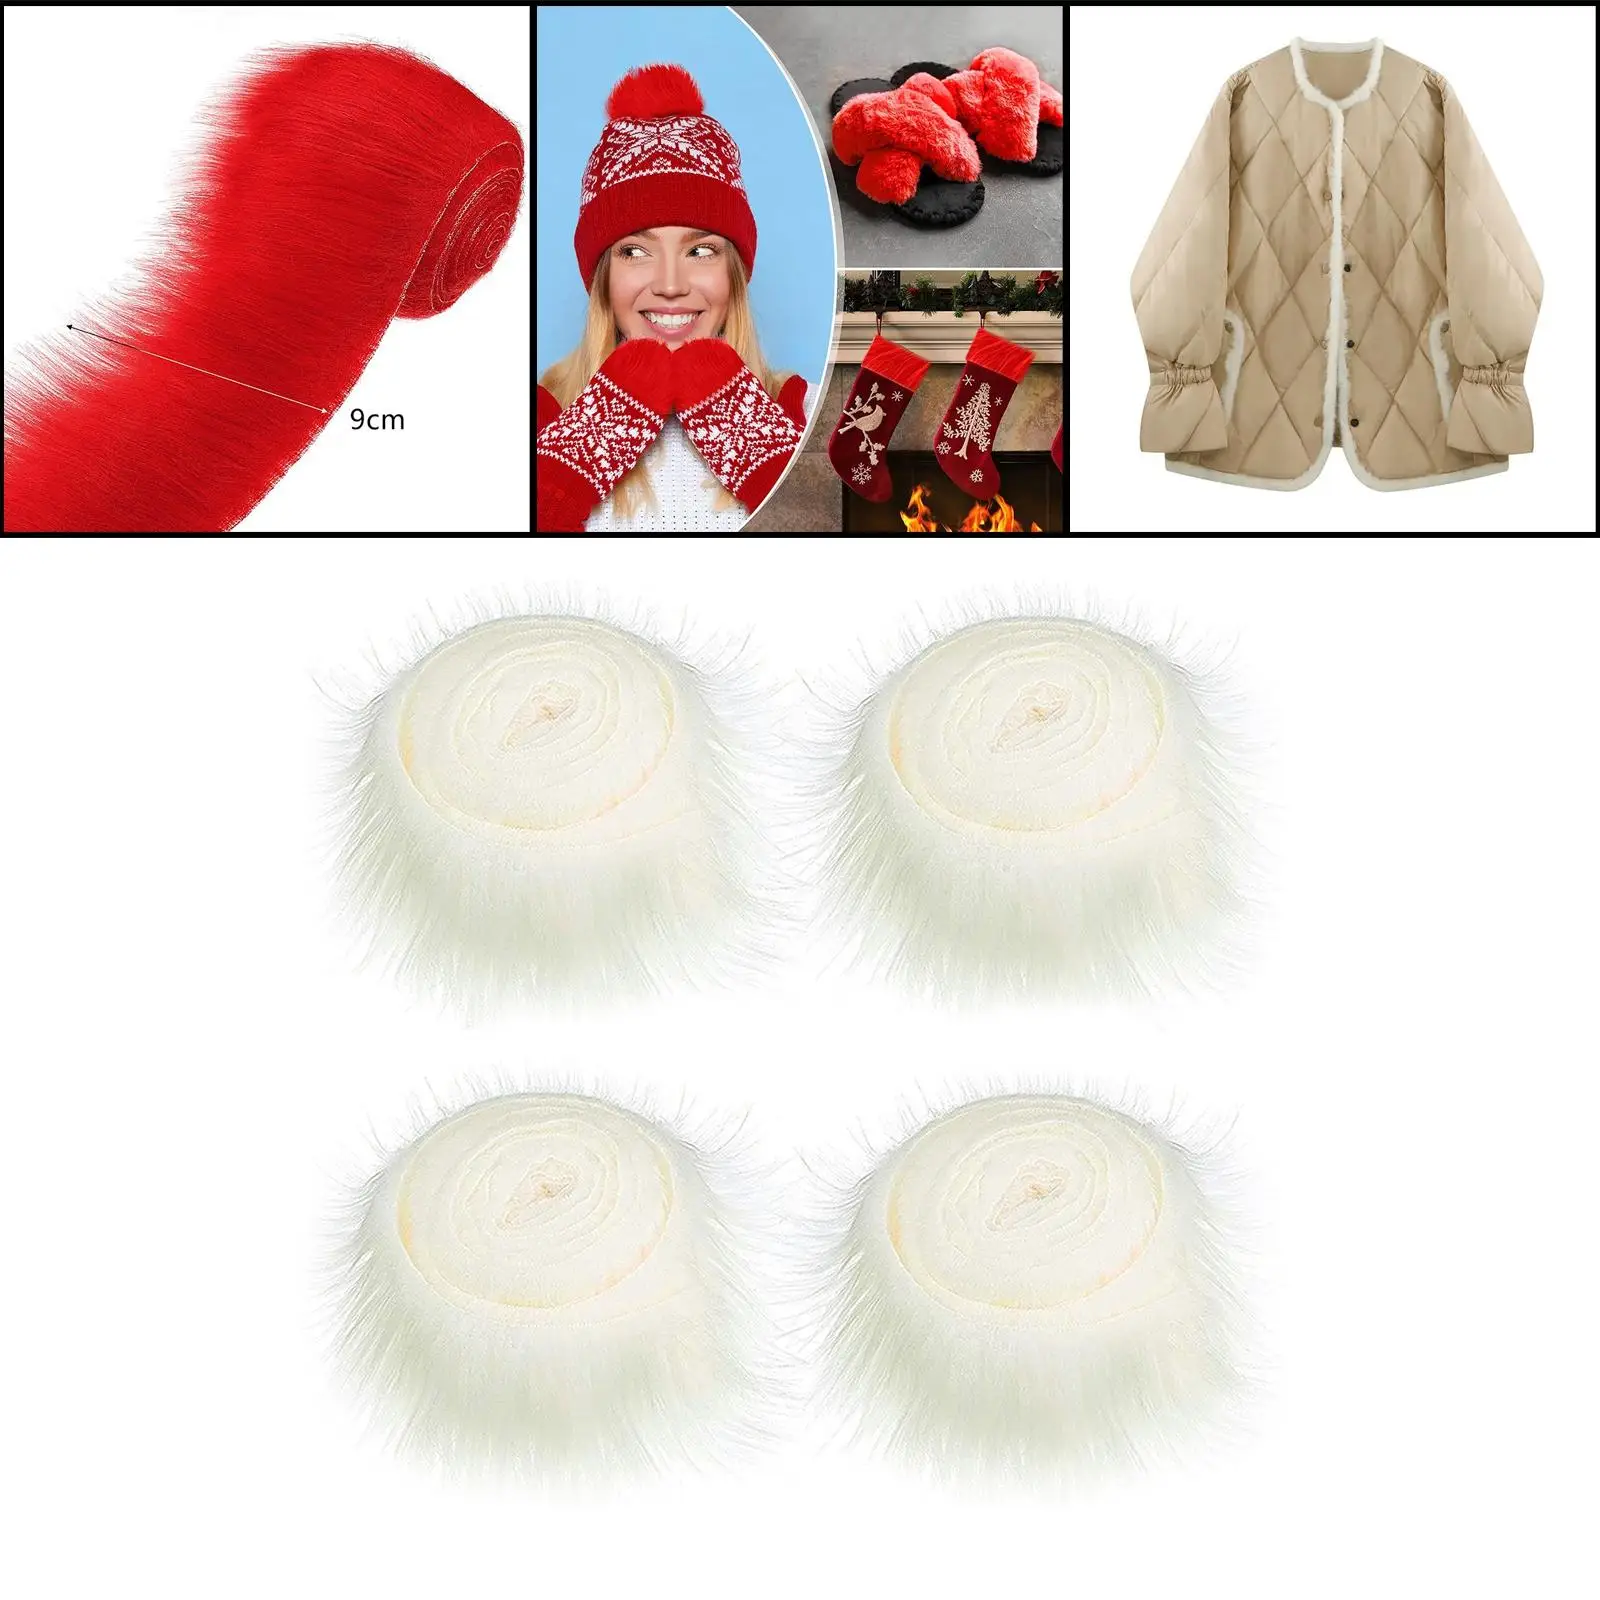 4Pcs Soft Faux Fur Fabric Costume Fuzzy Faux Fur Fabric Craft DIY Clothing Toy for Christmas Party Decoration